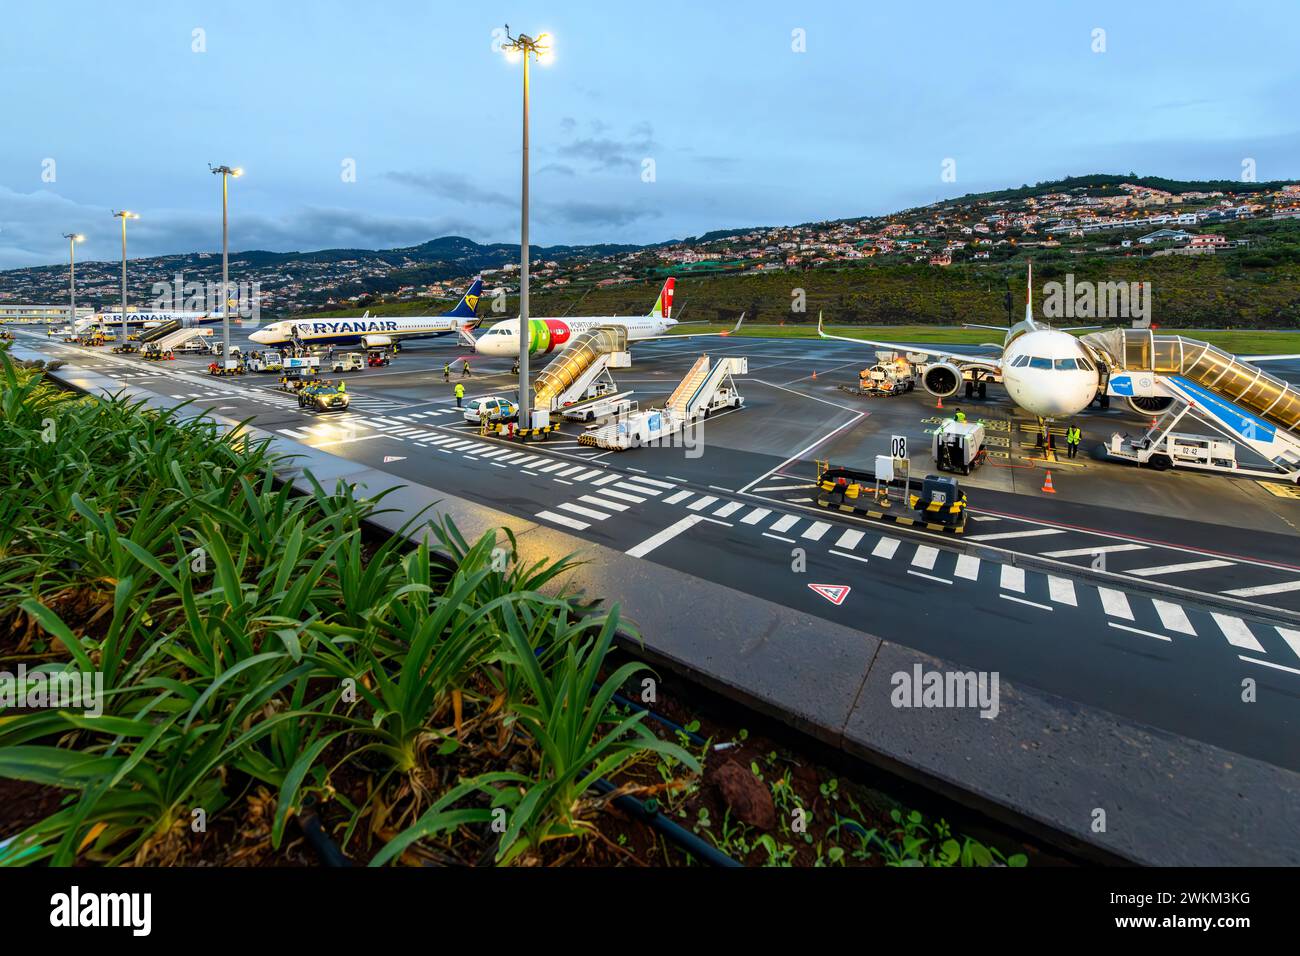 Evening view of the main runway at the Madeira Cristiano Ronaldo Airport, or Funchal Airport, on the island Madeira, Portugal, in the Canary Islands. Stock Photo